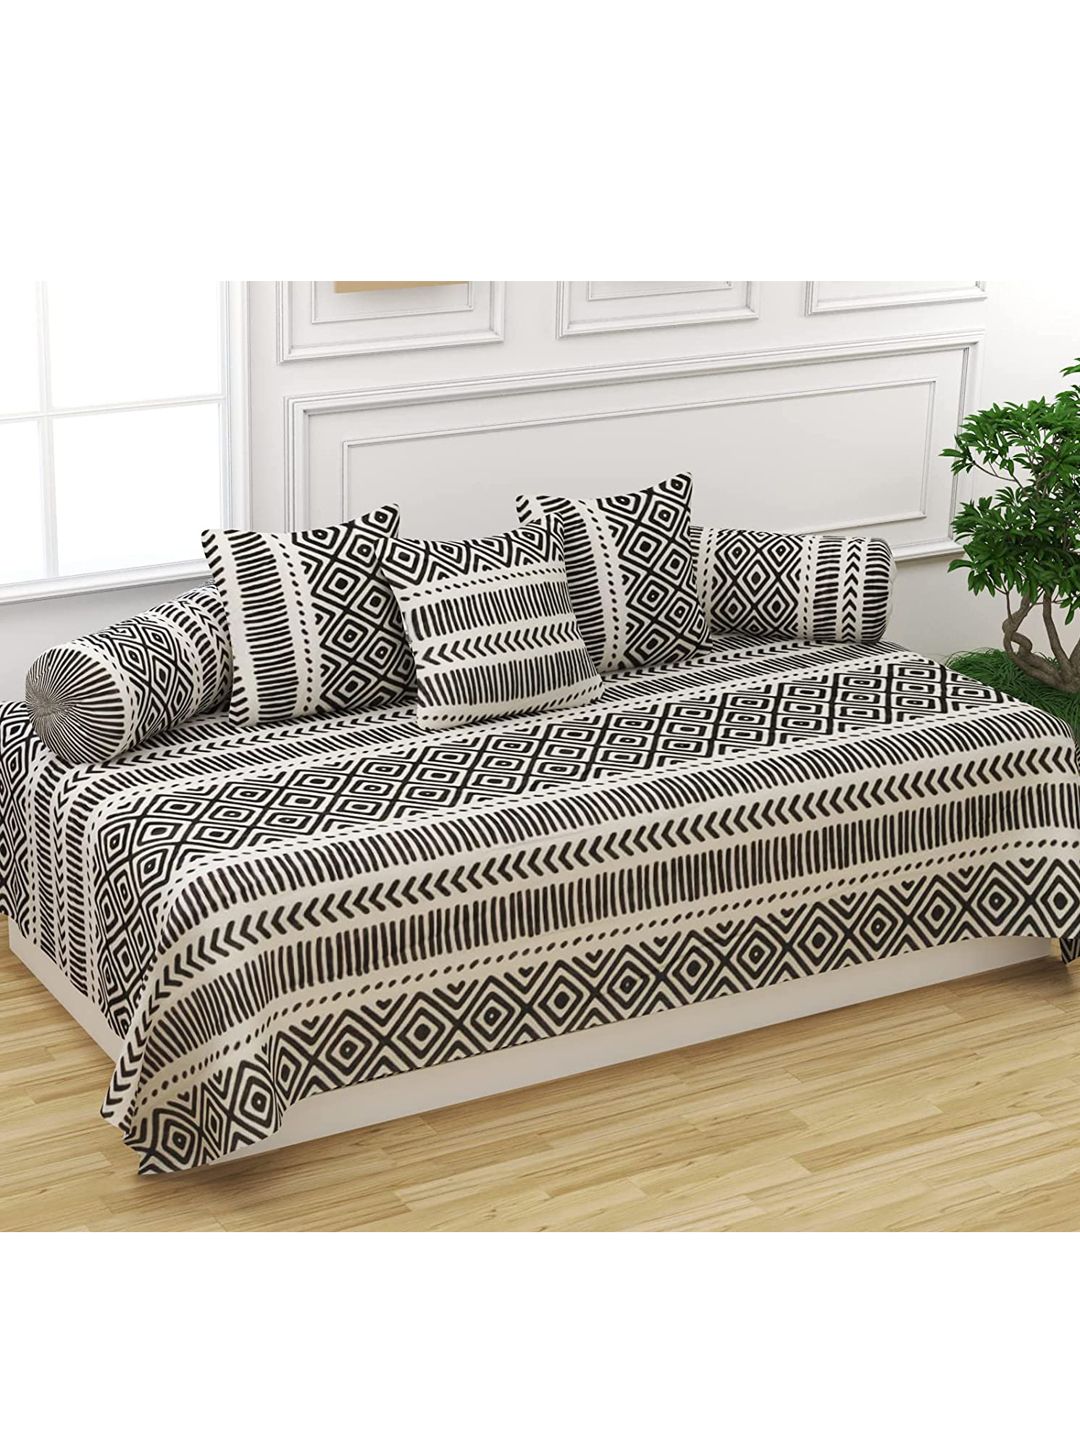 Trance Home Linen Black 6 Geometric Printed Cotton Diwan Set With Cushion & Bolster Covers Price in India